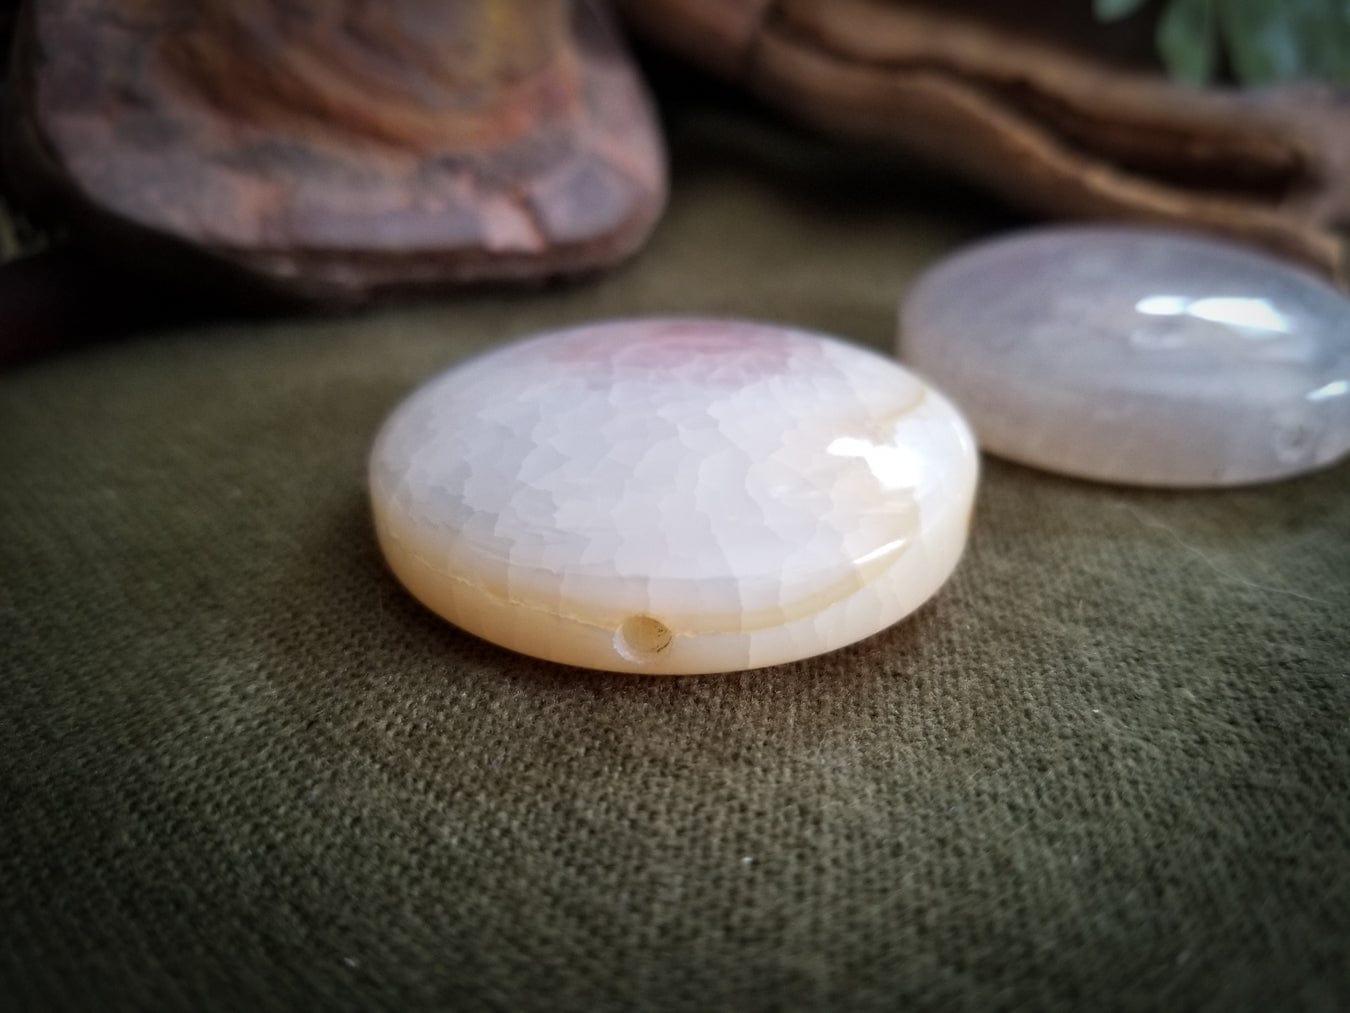 2 Flat Round Agate beads. Color - translucent with tones of white, pink, and pale yellow. Smooth with a cracked effect created by heat.